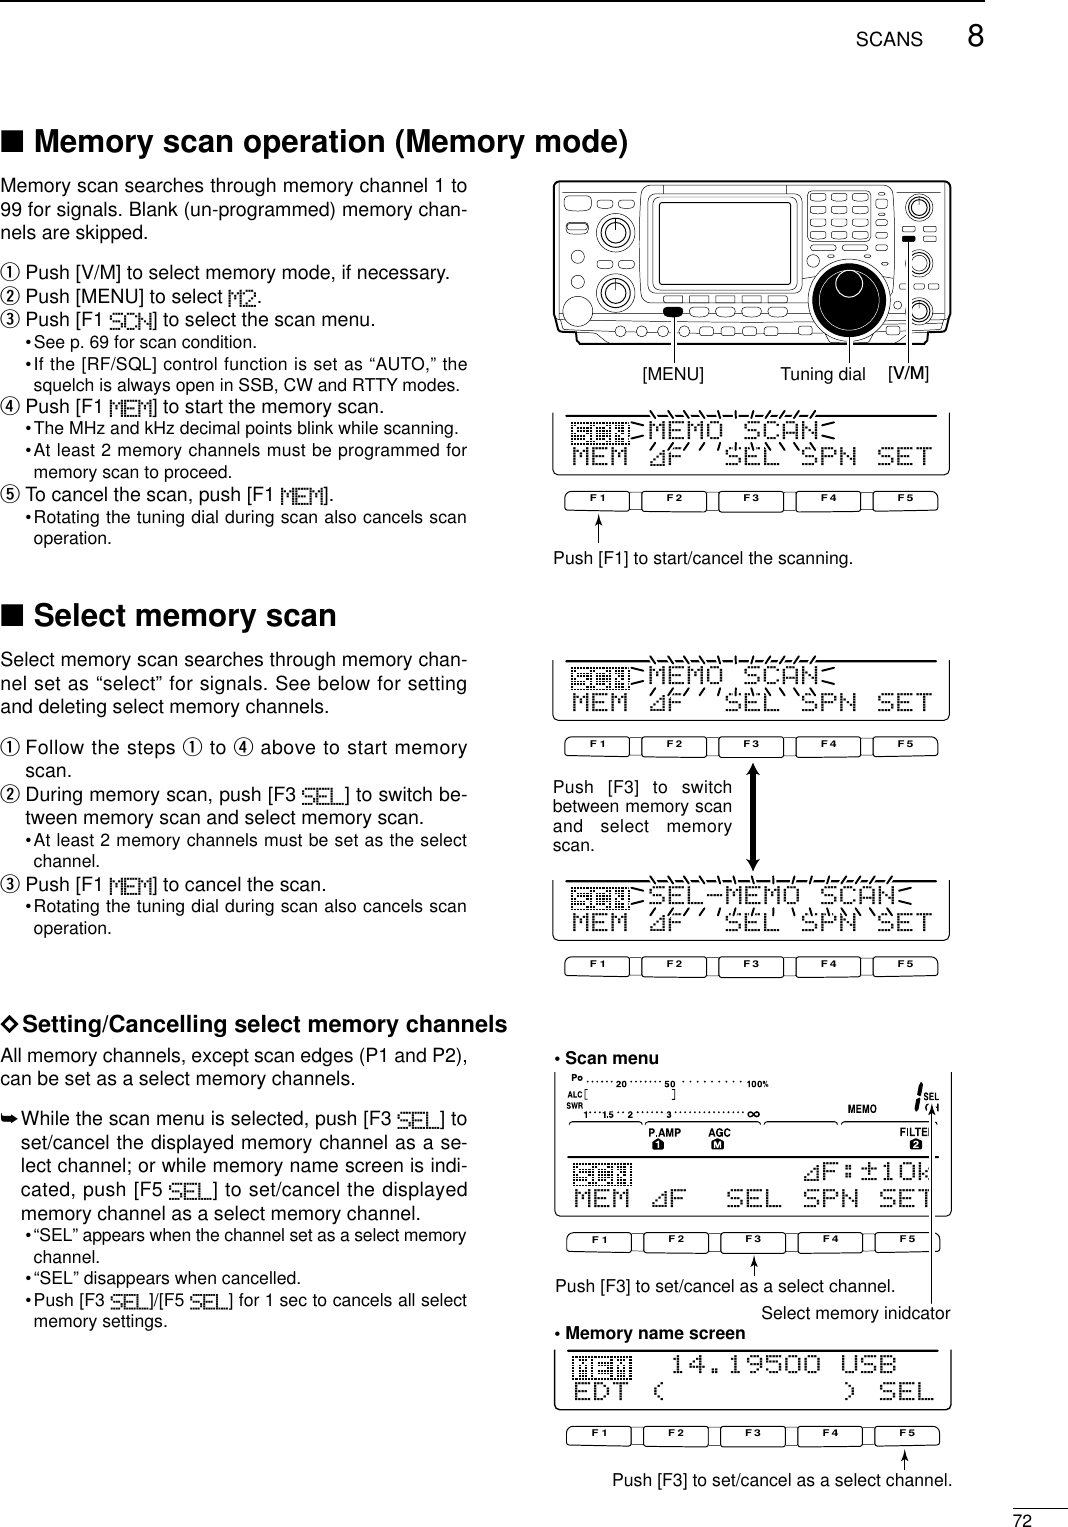 728SCANS■Memory scan operation (Memory mode)Memory scan searches through memory channel 1 to99 for signals. Blank (un-programmed) memory chan-nels are skipped.qPush [V/M] to select memory mode, if necessary.wPush [MENU] to select M2.ePush [F1 SCN] to select the scan menu.•See p. 69 for scan condition.•If the [RF/SQL] control function is set as “AUTO,” thesquelch is always open in SSB, CW and RTTY modes.rPush [F1 MEM] to start the memory scan.•The MHz and kHz decimal points blink while scanning.•At least 2 memory channels must be programmed formemory scan to proceed.tTo cancel the scan, push [F1 MEM].•Rotating the tuning dial during scan also cancels scanoperation.■Select memory scan Select memory scan searches through memory chan-nel set as “select” for signals. See below for settingand deleting select memory channels.qFollow the steps qto rabove to start memoryscan.wDuring memory scan, push [F3 SEL] to switch be-tween memory scan and select memory scan.•At least 2 memory channels must be set as the selectchannel.ePush [F1 MEM] to cancel the scan.•Rotating the tuning dial during scan also cancels scanoperation.DSetting/Cancelling select memory channelsAll memory channels, except scan edges (P1 and P2),can be set as a select memory channels.➥While the scan menu is selected, push [F3 SEL] toset/cancel the displayed memory channel as a se-lect channel; or while memory name screen is indi-cated, push [F5 SEL] to set/cancel the displayedmemory channel as a select memory channel.•“SEL” appears when the channel set as a select memorychannel.•“SEL” disappears when cancelled.•Push [F3 SEL]/[F5 SEL] for 1 sec to cancels all selectmemory settings.Tuning dial[MENU] [V/M]F 1F 2F 3F 4F 5MEM ∂F  SEL SPN SETMEMO SCANPush [F1] to start/cancel the scanning.F 1F 2F 3F 4F 5F 1F 2F 3F 4F 5MEM ∂F  SEL SPN SETMEMO SCANMEM ∂F  SEL SPN SETSEL-MEMO SCANPush [F3] to switch between memory scan and select memory scan.F 1F 2F 3F 4F 5F 1F 2F 3F 4F 5∂F:±1OkMEM ∂F  SEL SPN SETPush [F3] to set/cancel as a select channel.Select memory inidcatorPush [F3] to set/cancel as a select channel.EDT (         ) SEL14.195OO USB• Scan menu• Memory name screen